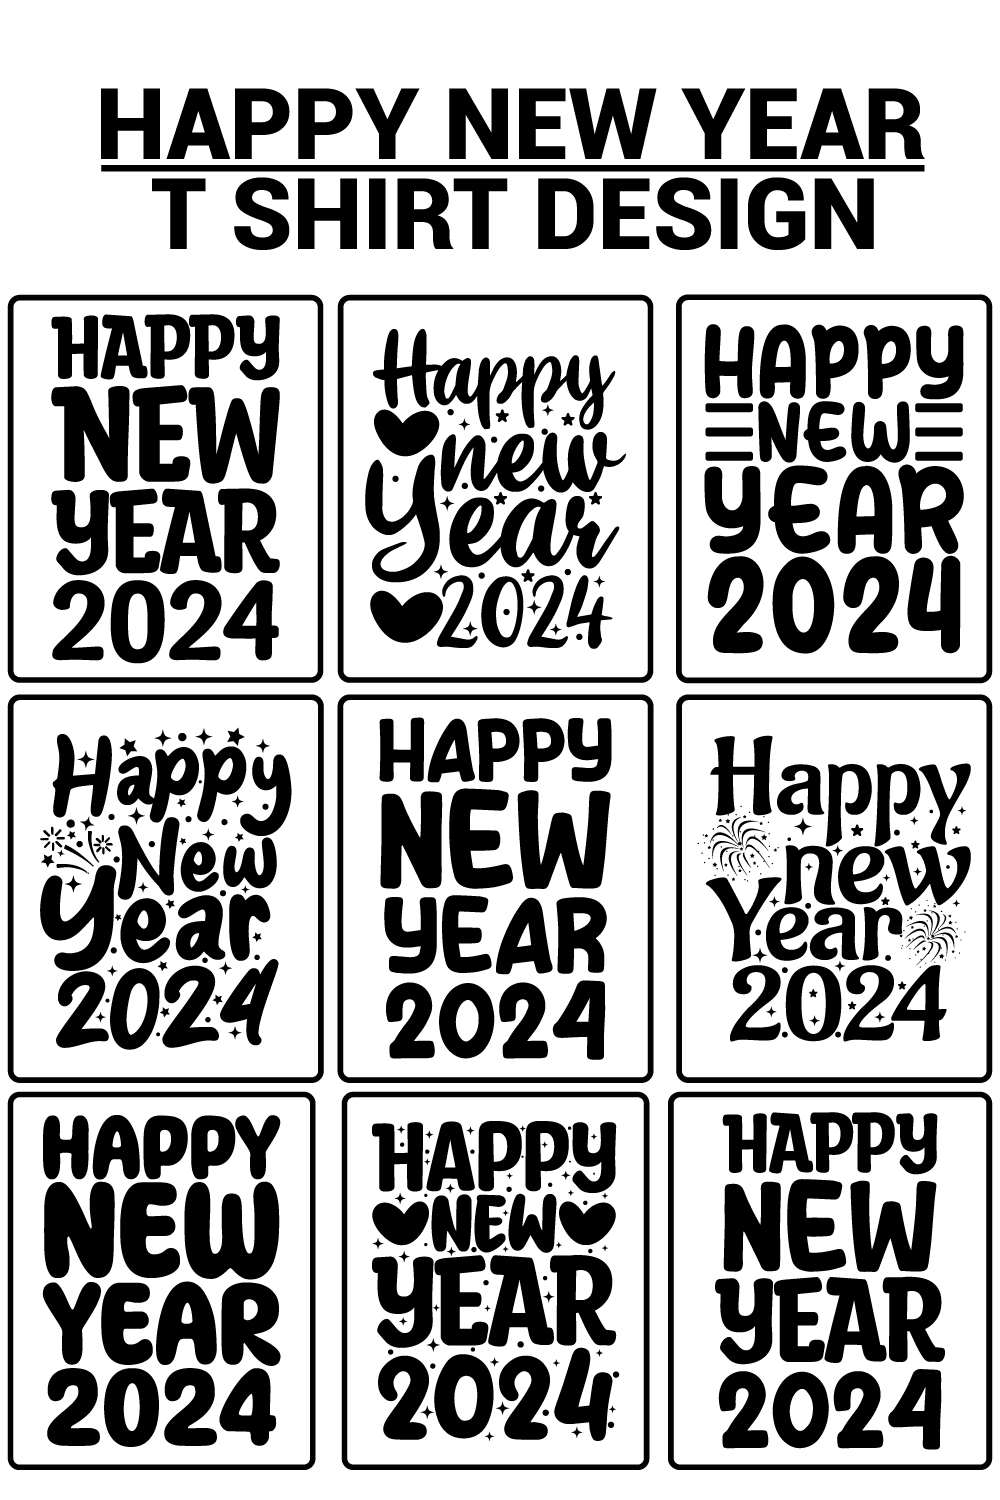 HAPPY NEW YEAR 2024 T SHIRT DESIGN pinterest preview image.